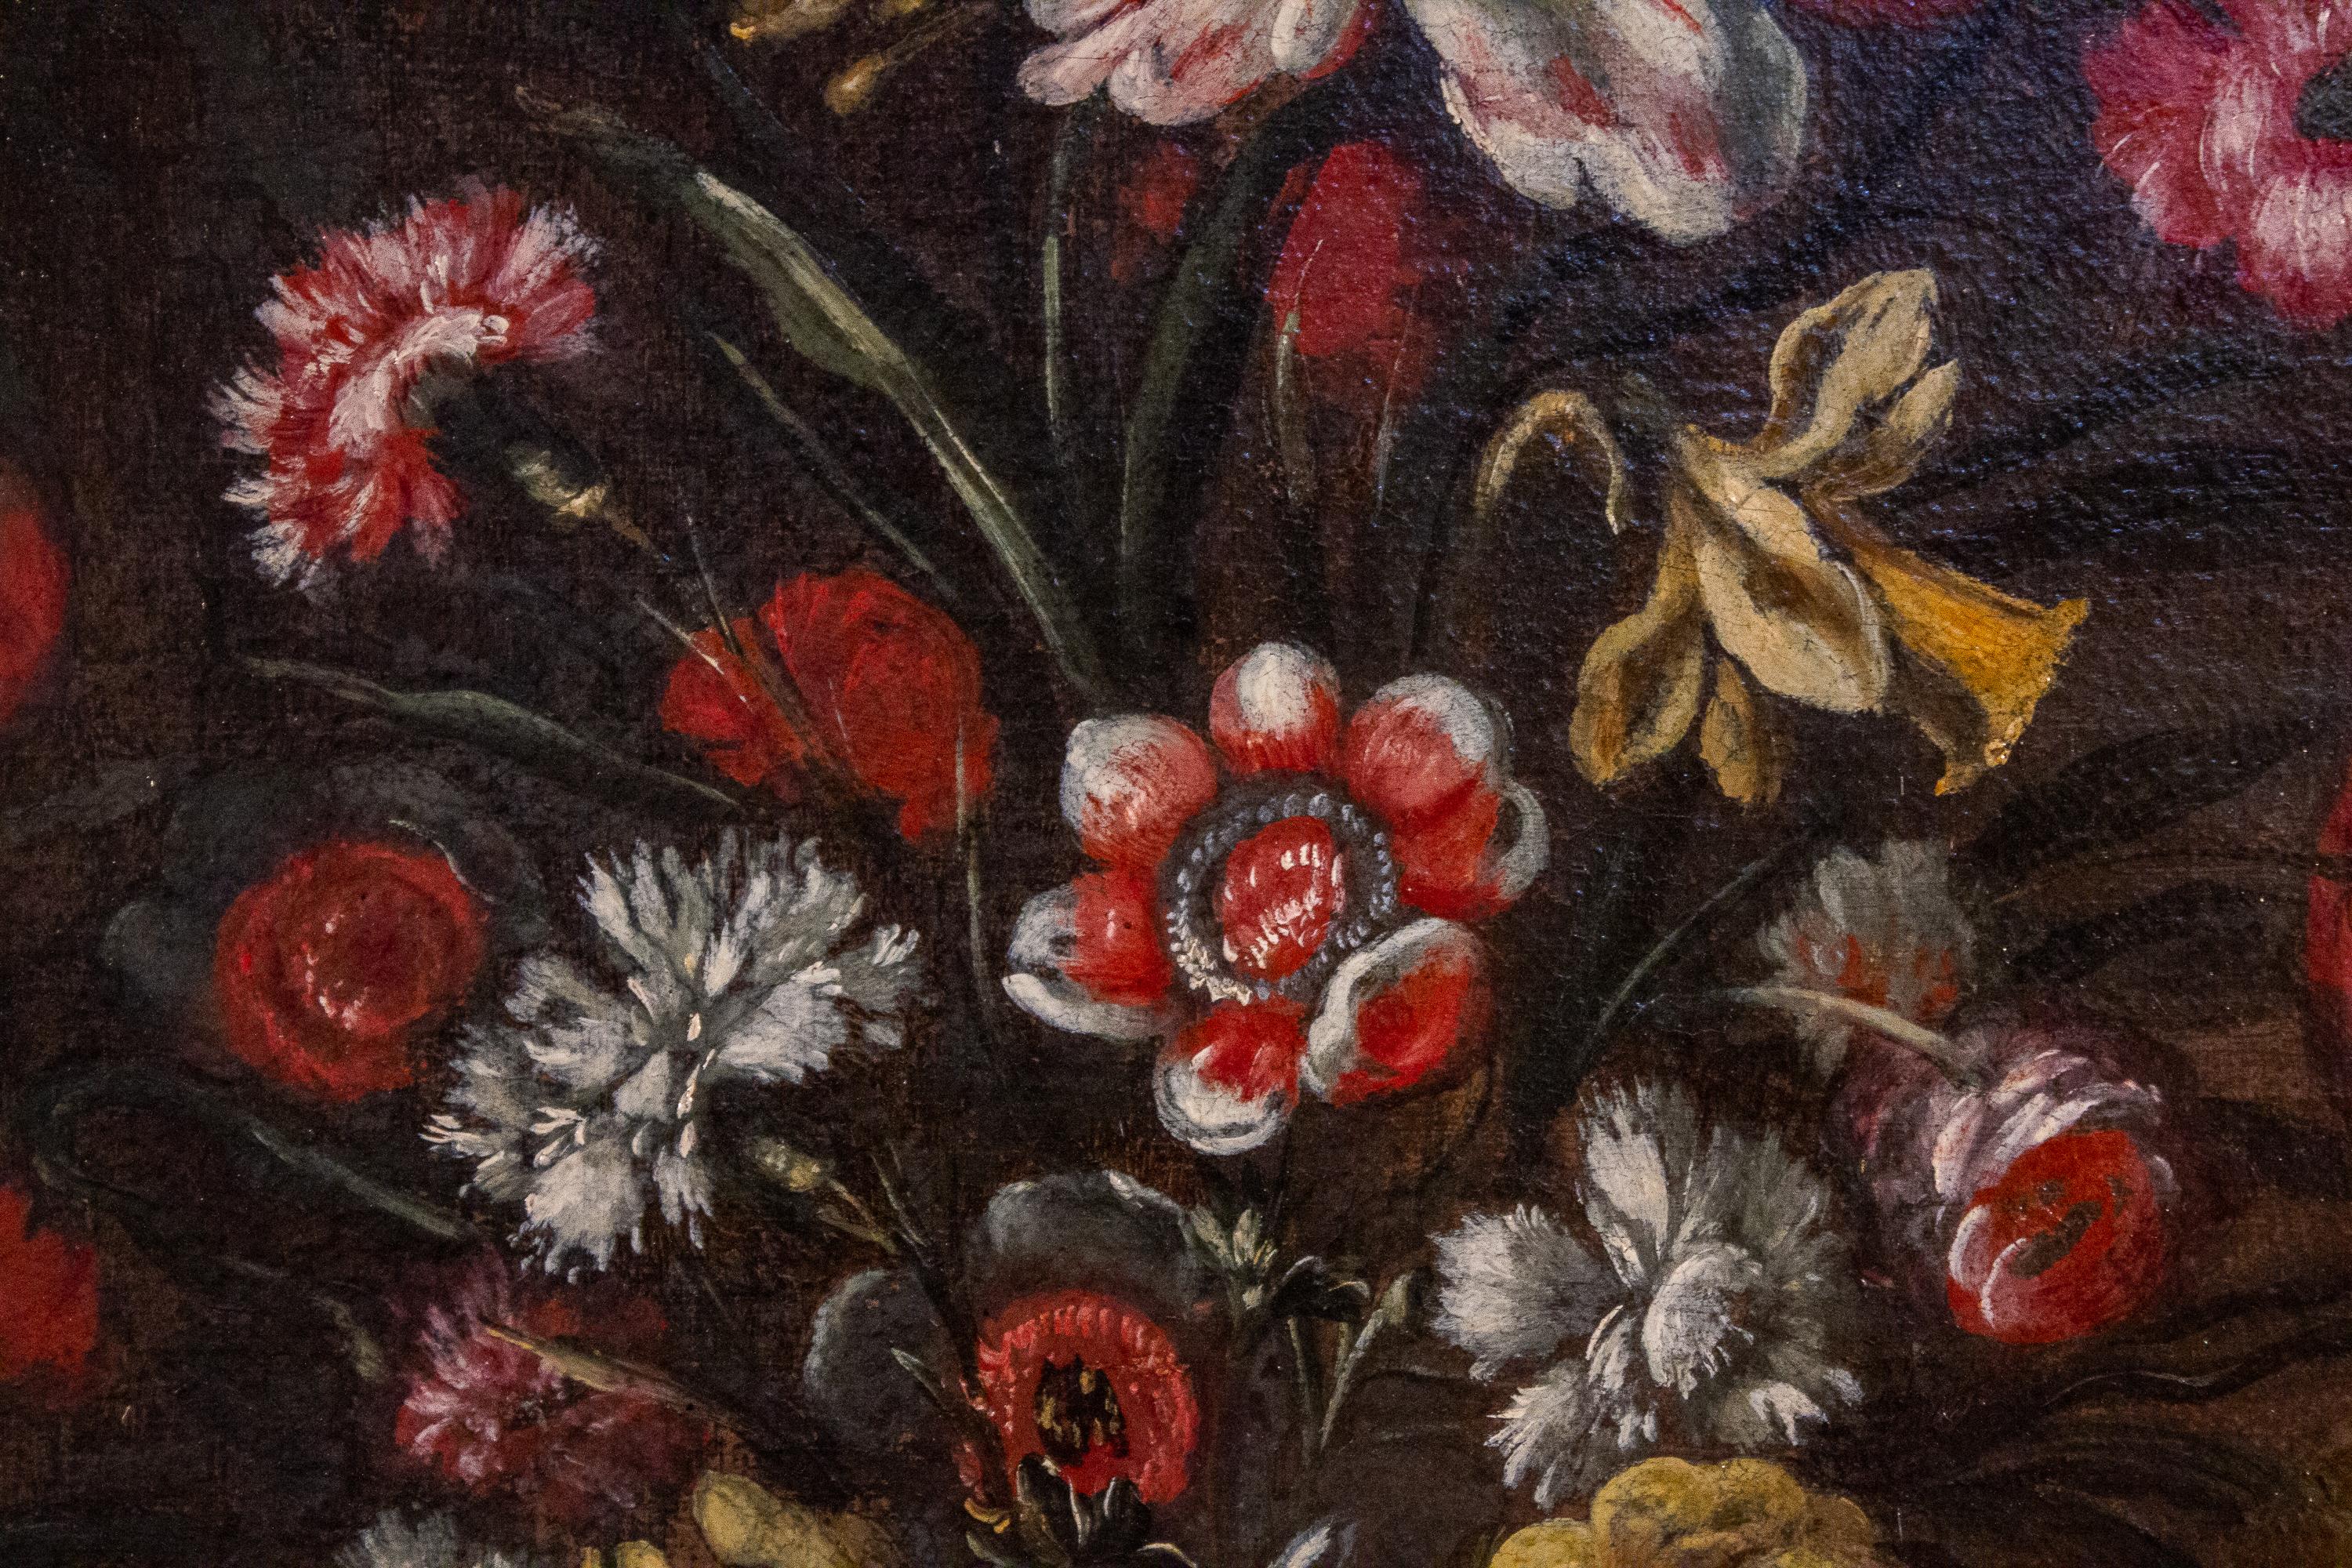 Pair of 18th century Italian Still Life Paintings of Flowers   For Sale 3